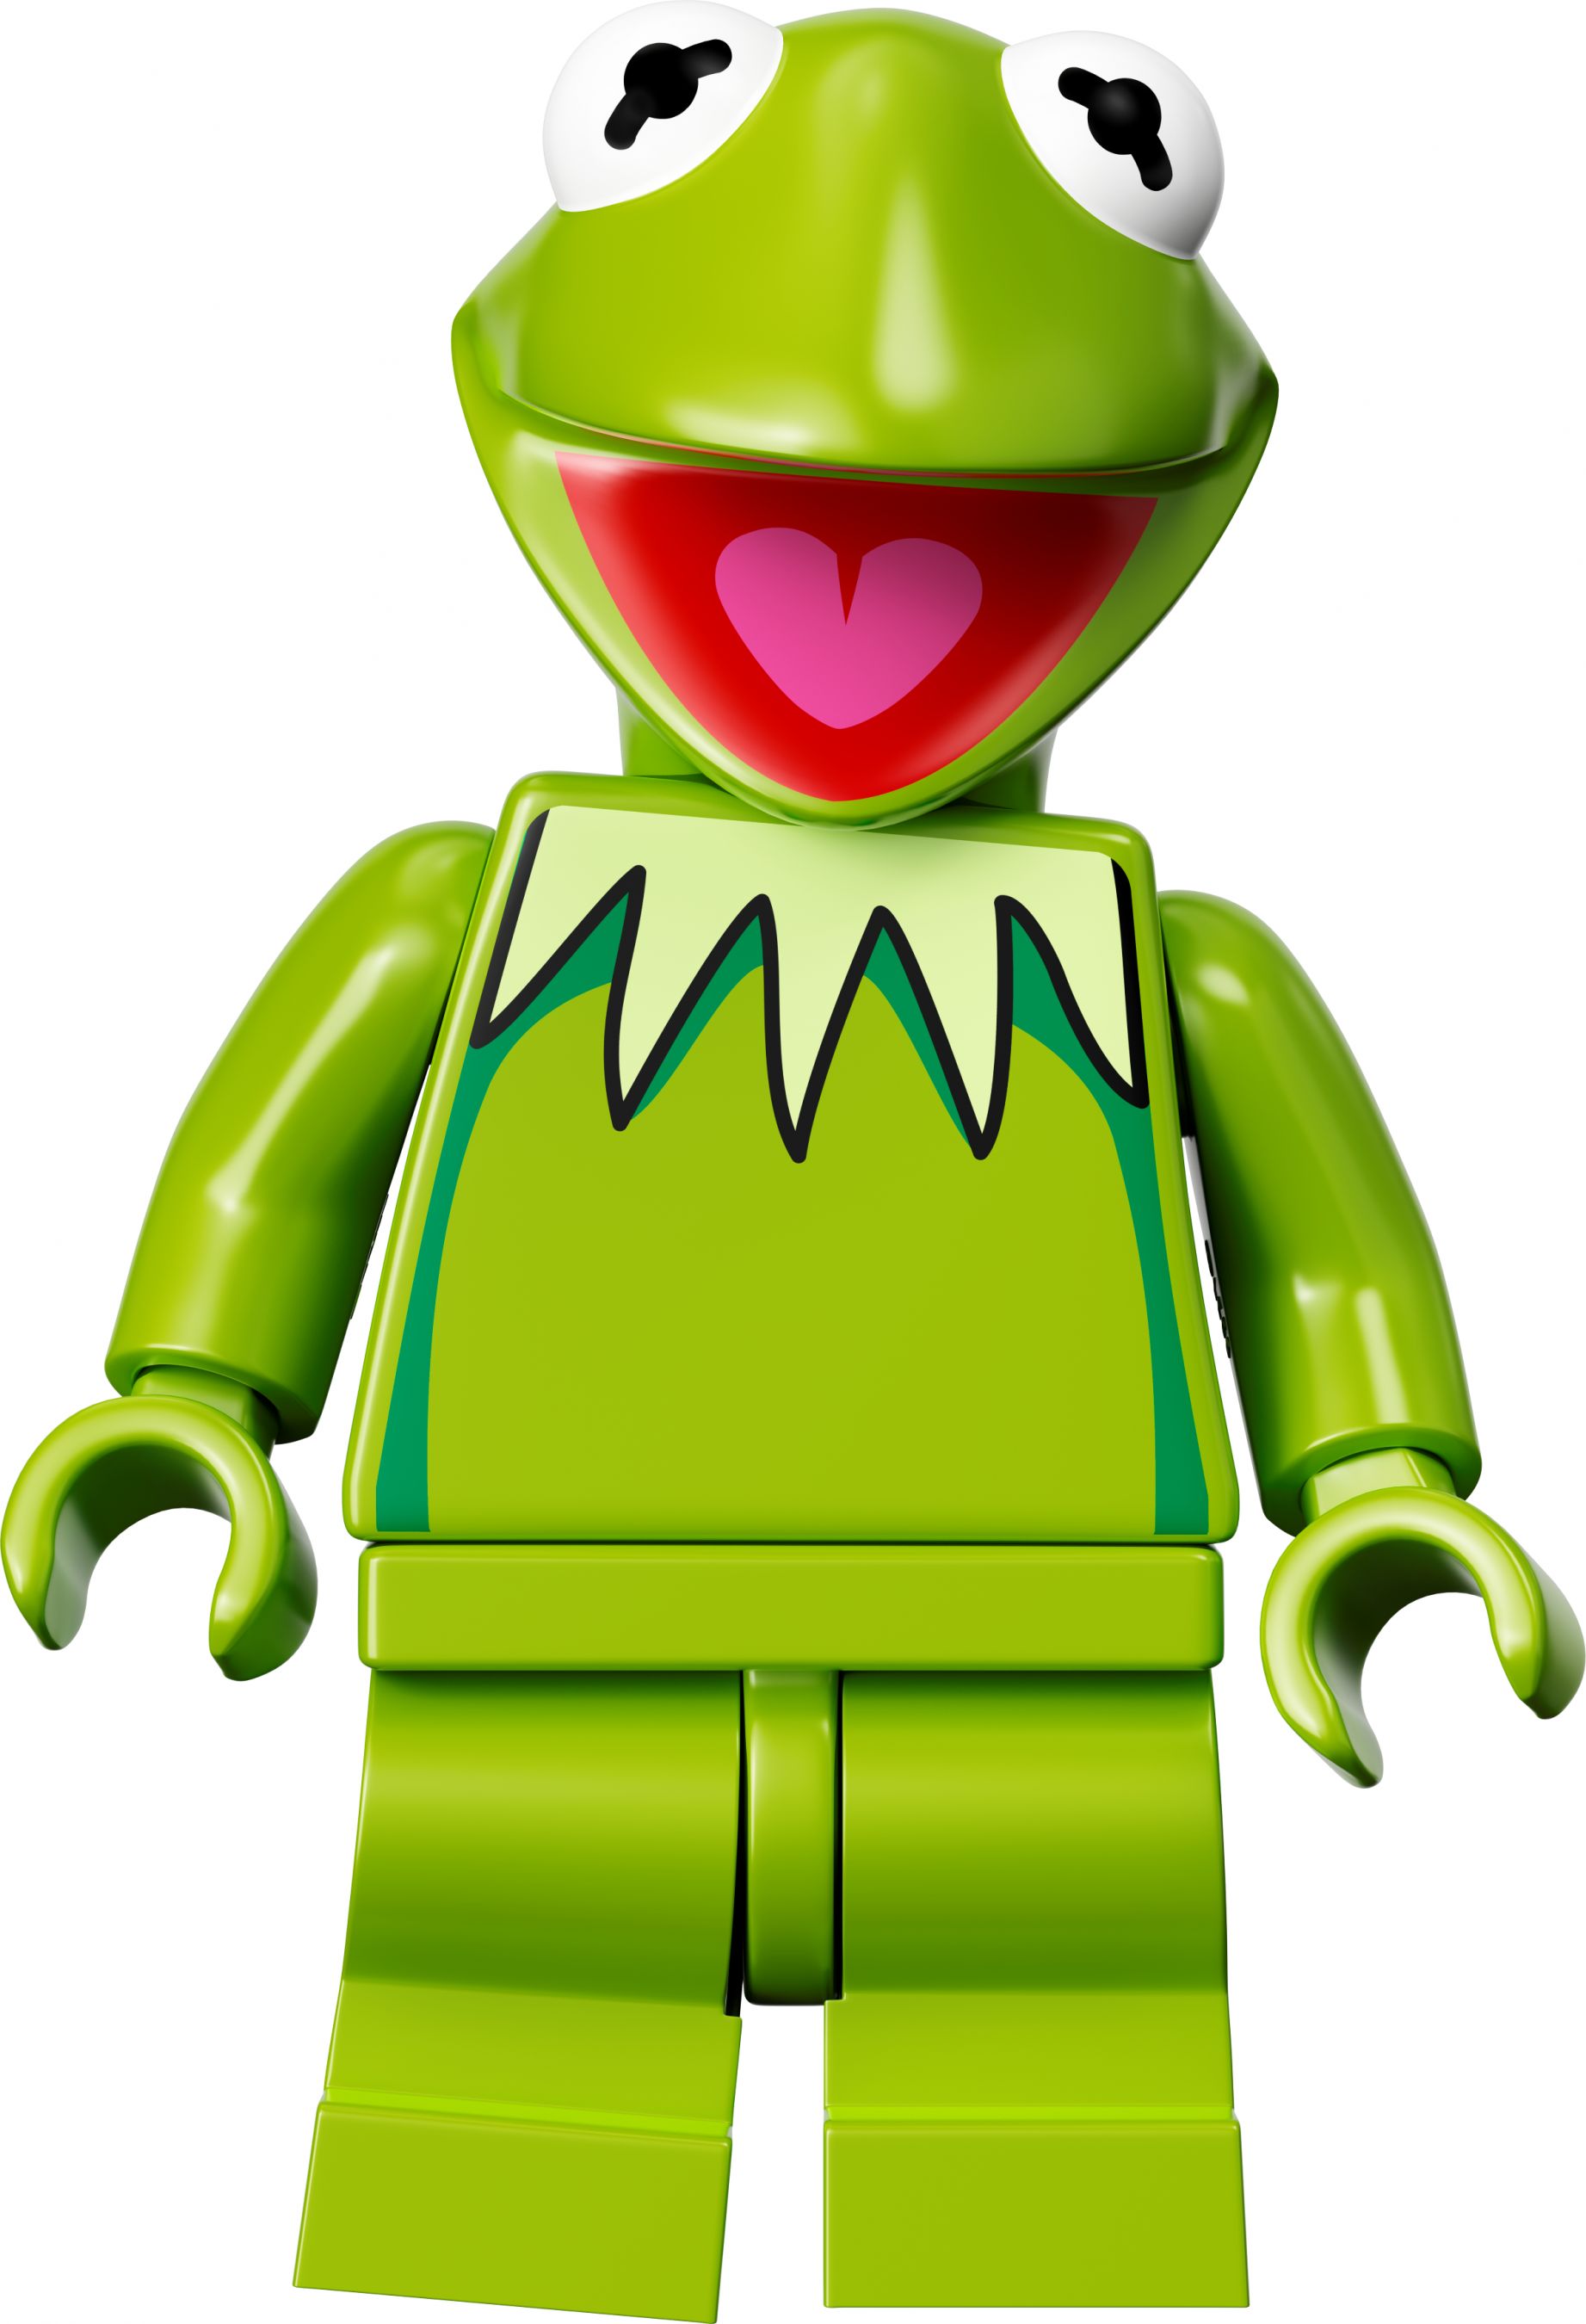 LEGO Collectable Minifigures 71033 LEGO® The Muppets Series LEGO_71033_alt5.jpg